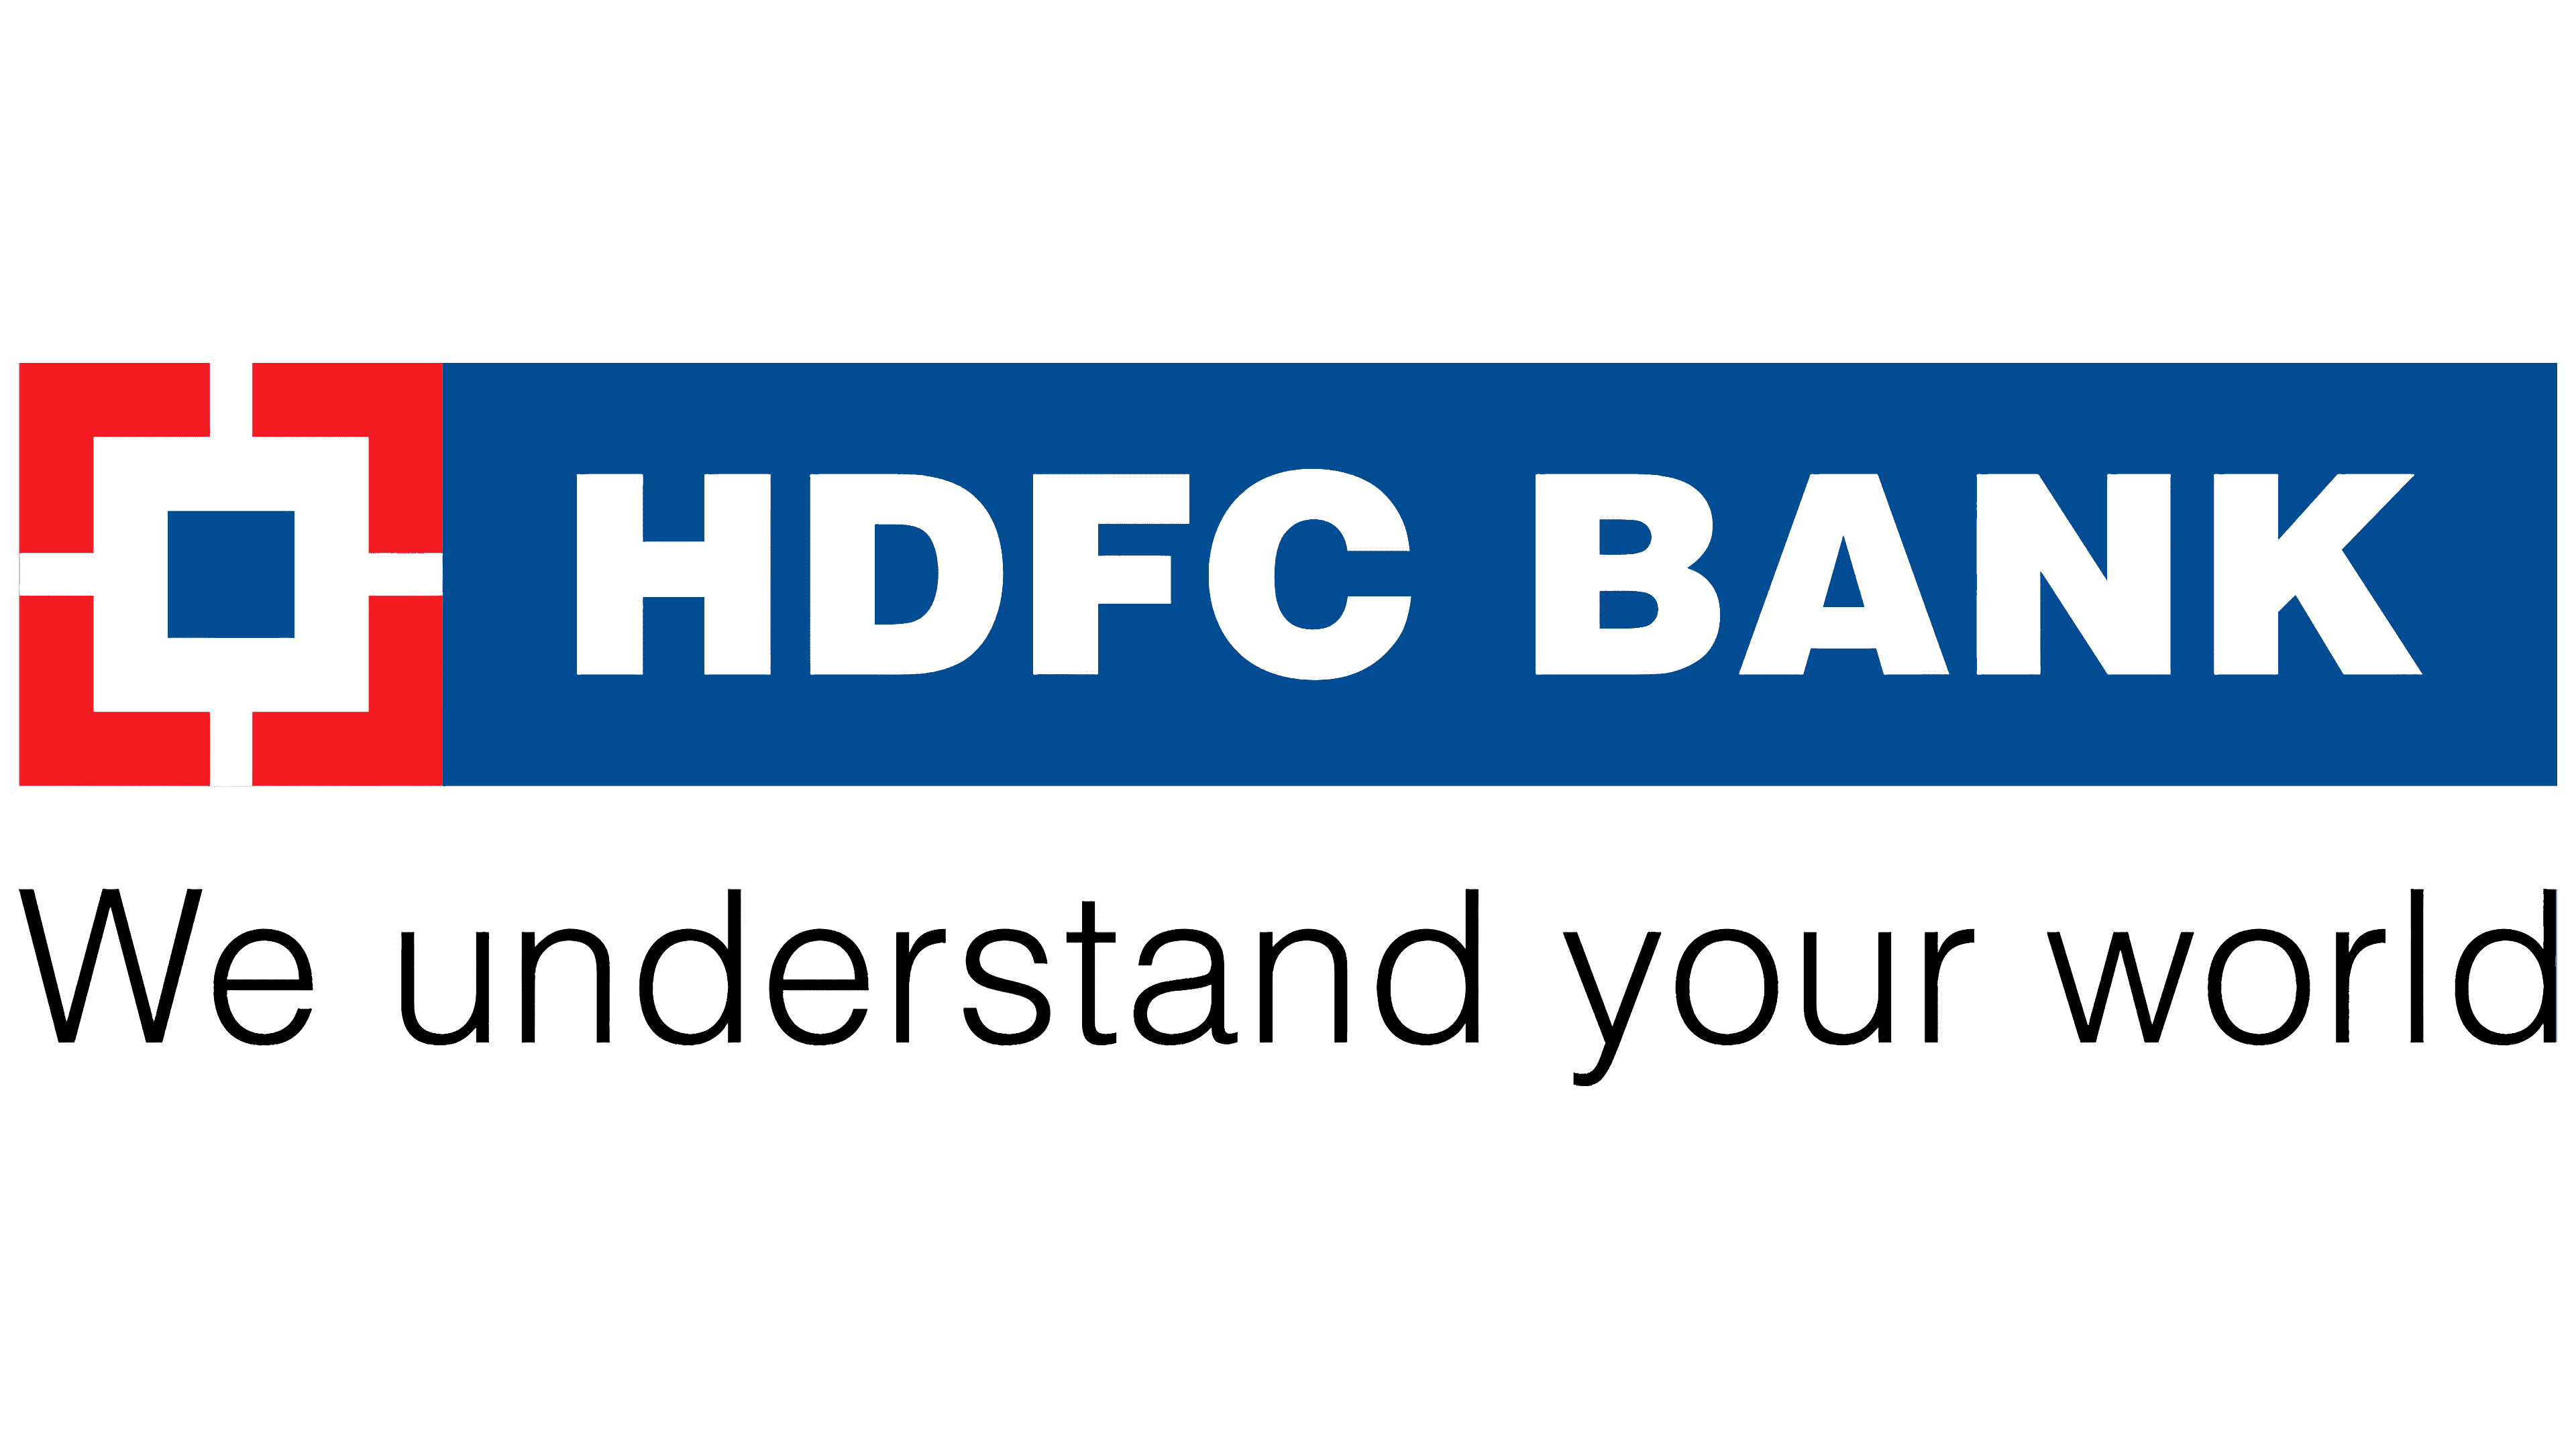 HDFC Bank Logo, symbol, meaning, history, PNG